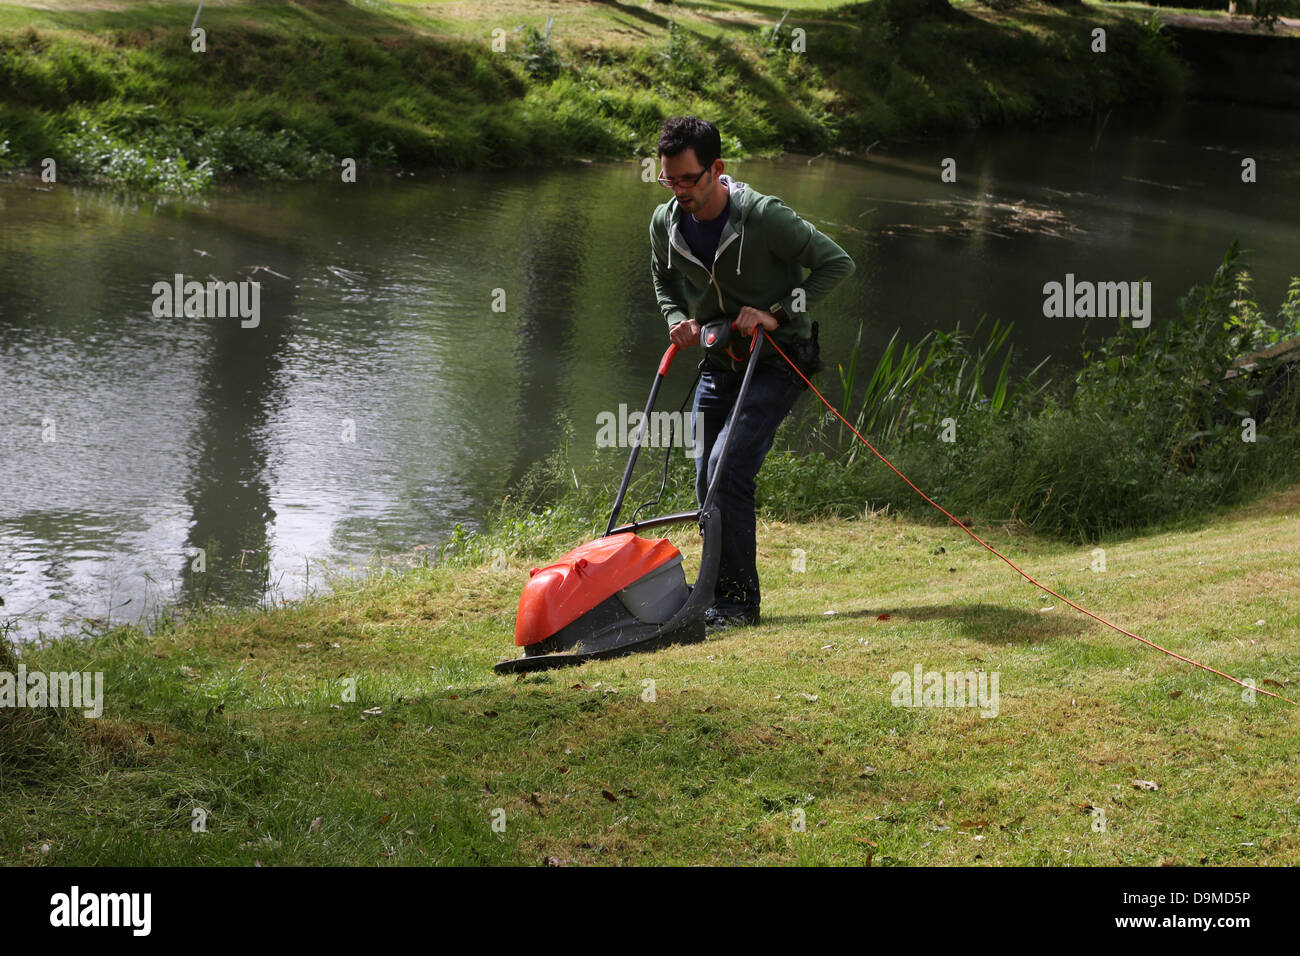 Man Mowing The Lawn With Flymo Lawnmower By River Stour Gillingham Dorset England Stock Photo